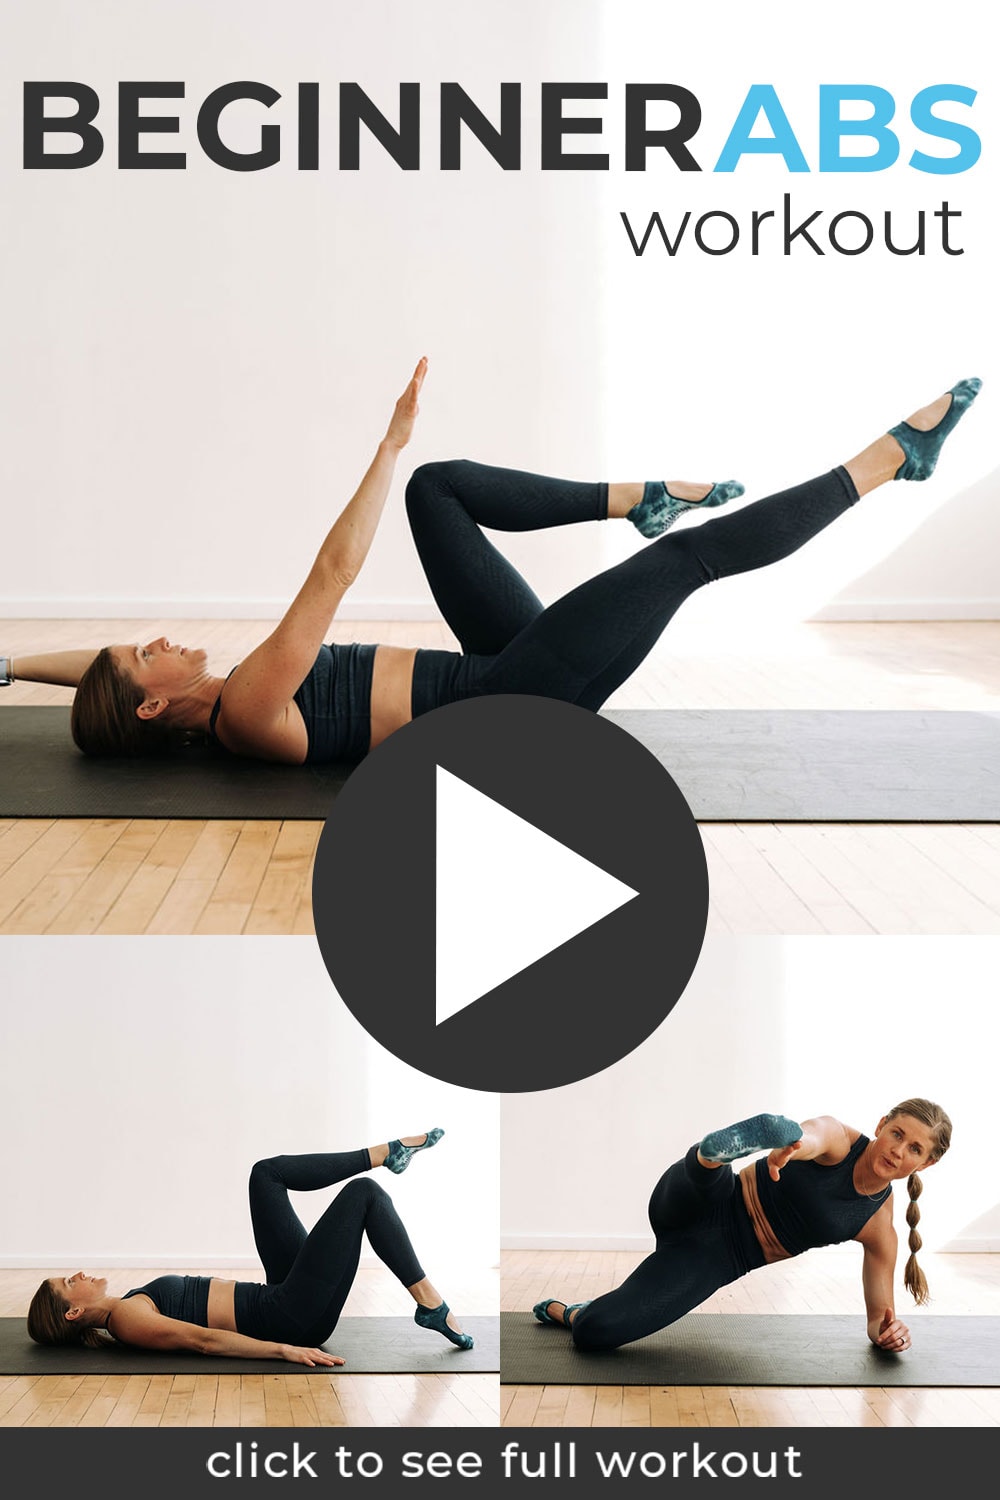 5-Minute Beginner Ab Workout (Video) | Nourish Move Love